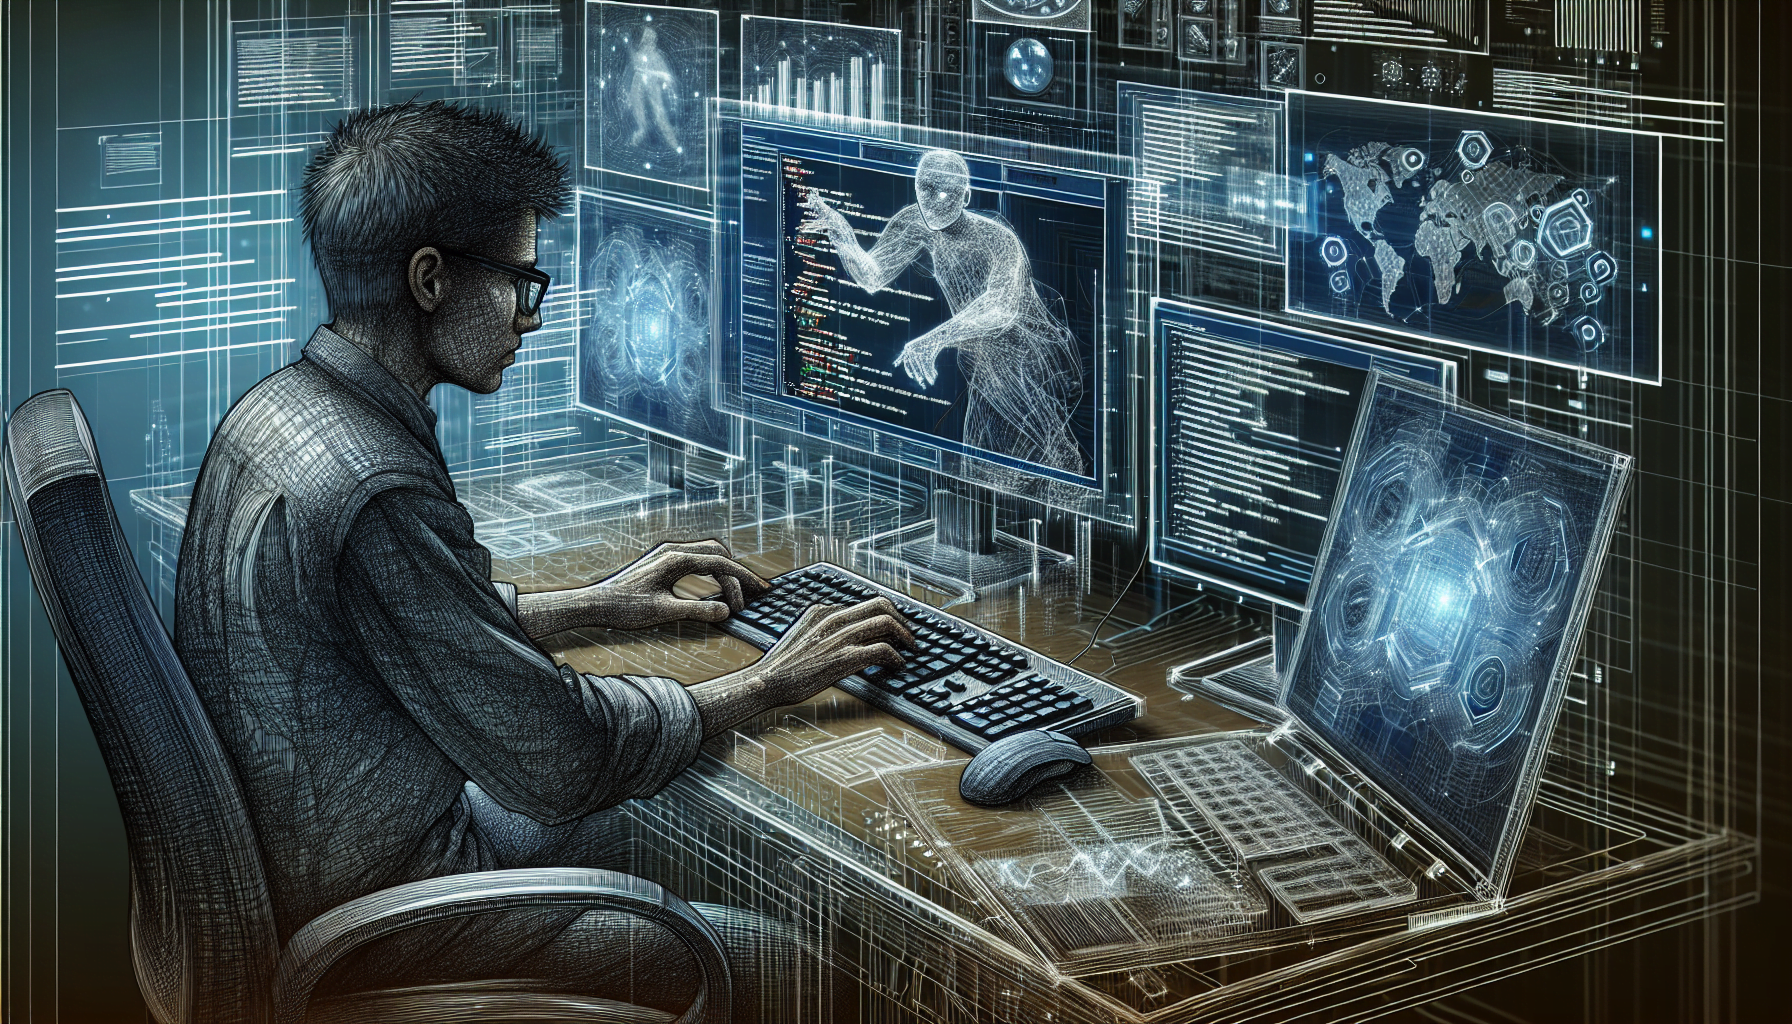 Illustration of a person using technology skills to program and analyze data